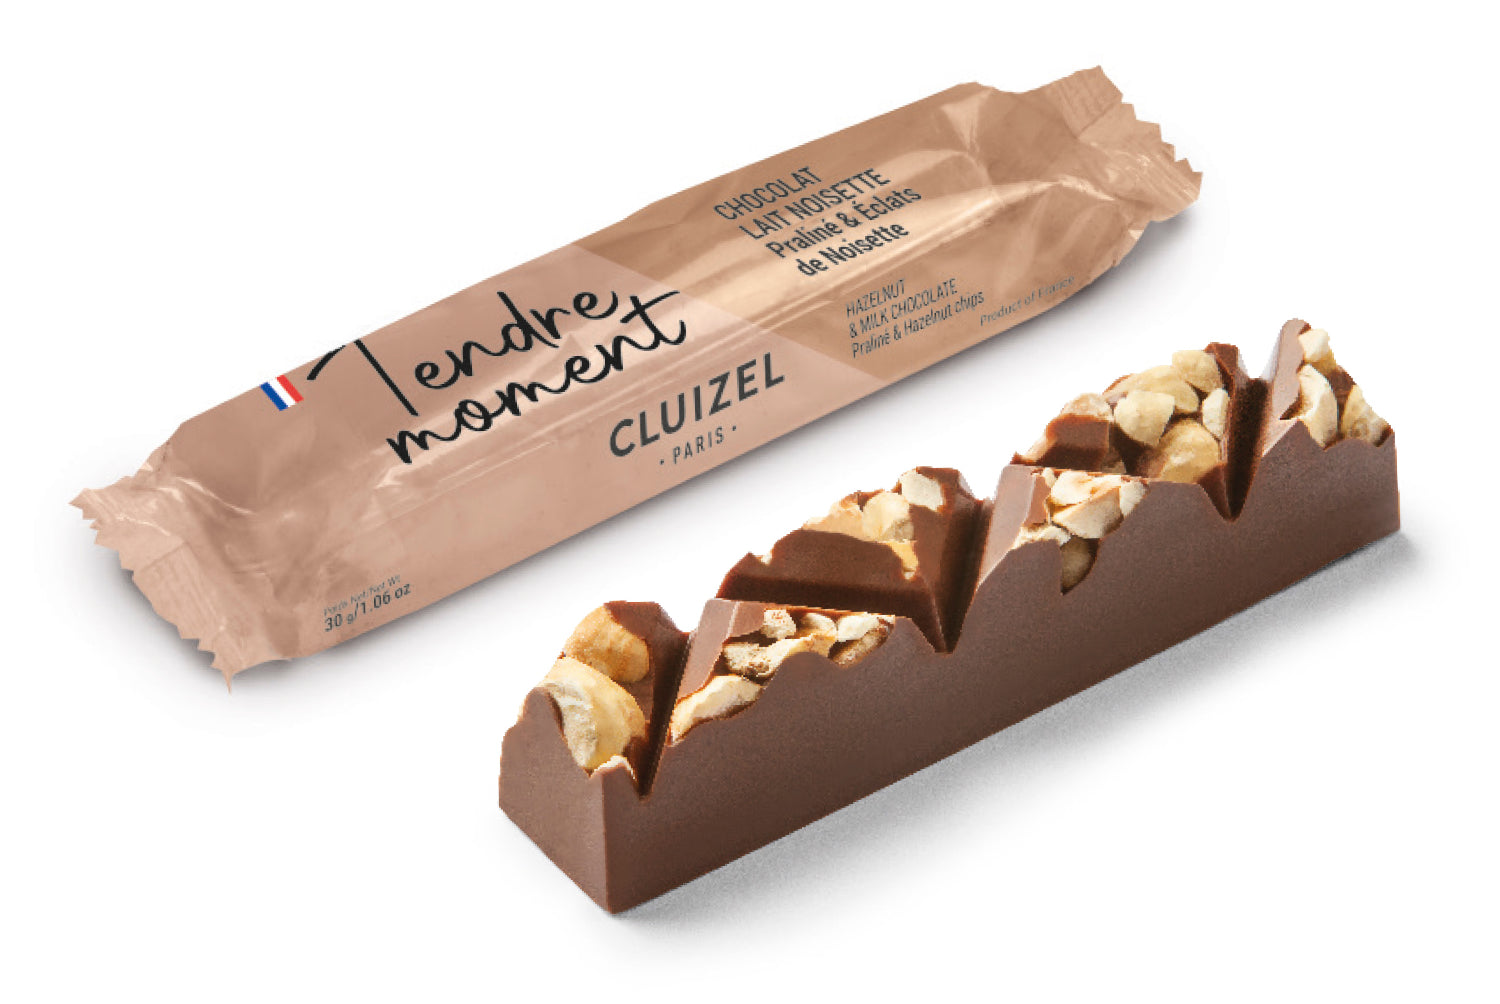 Chocolate Tendre Moment Cluizel